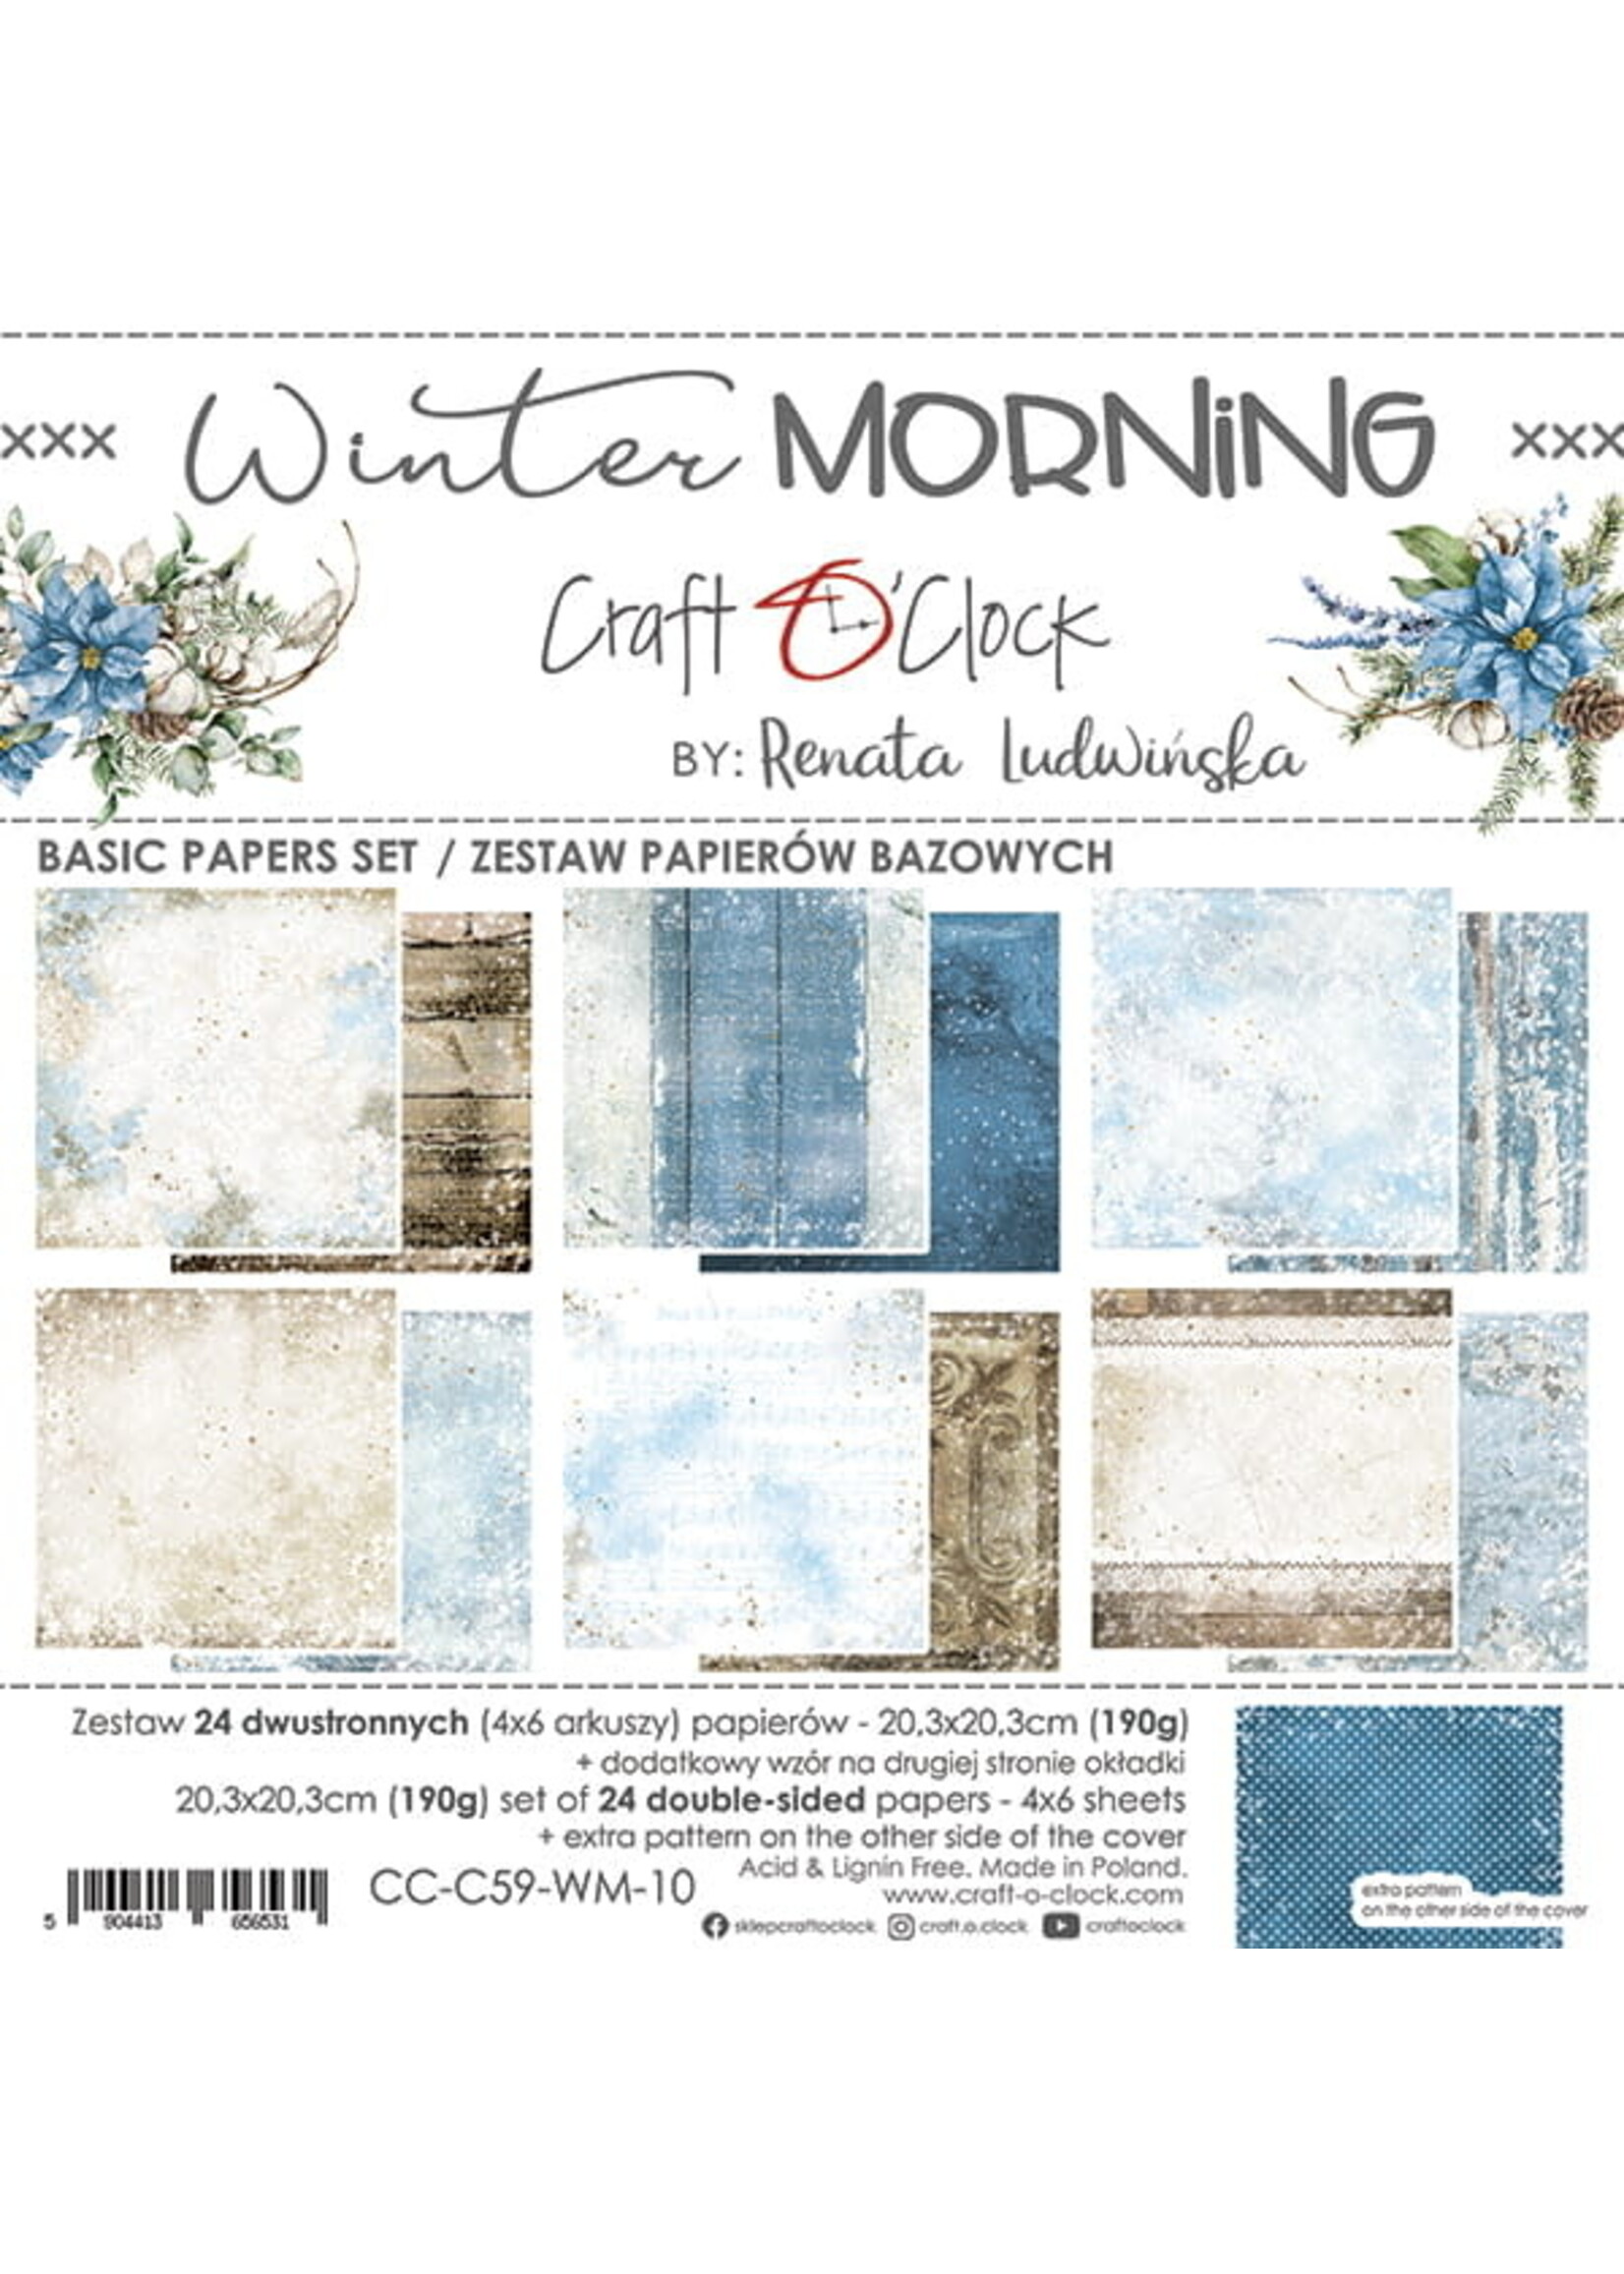 Craft O Clock WINTER MORNING - SET OF BASIC PAPERS 20,3X20,3CM